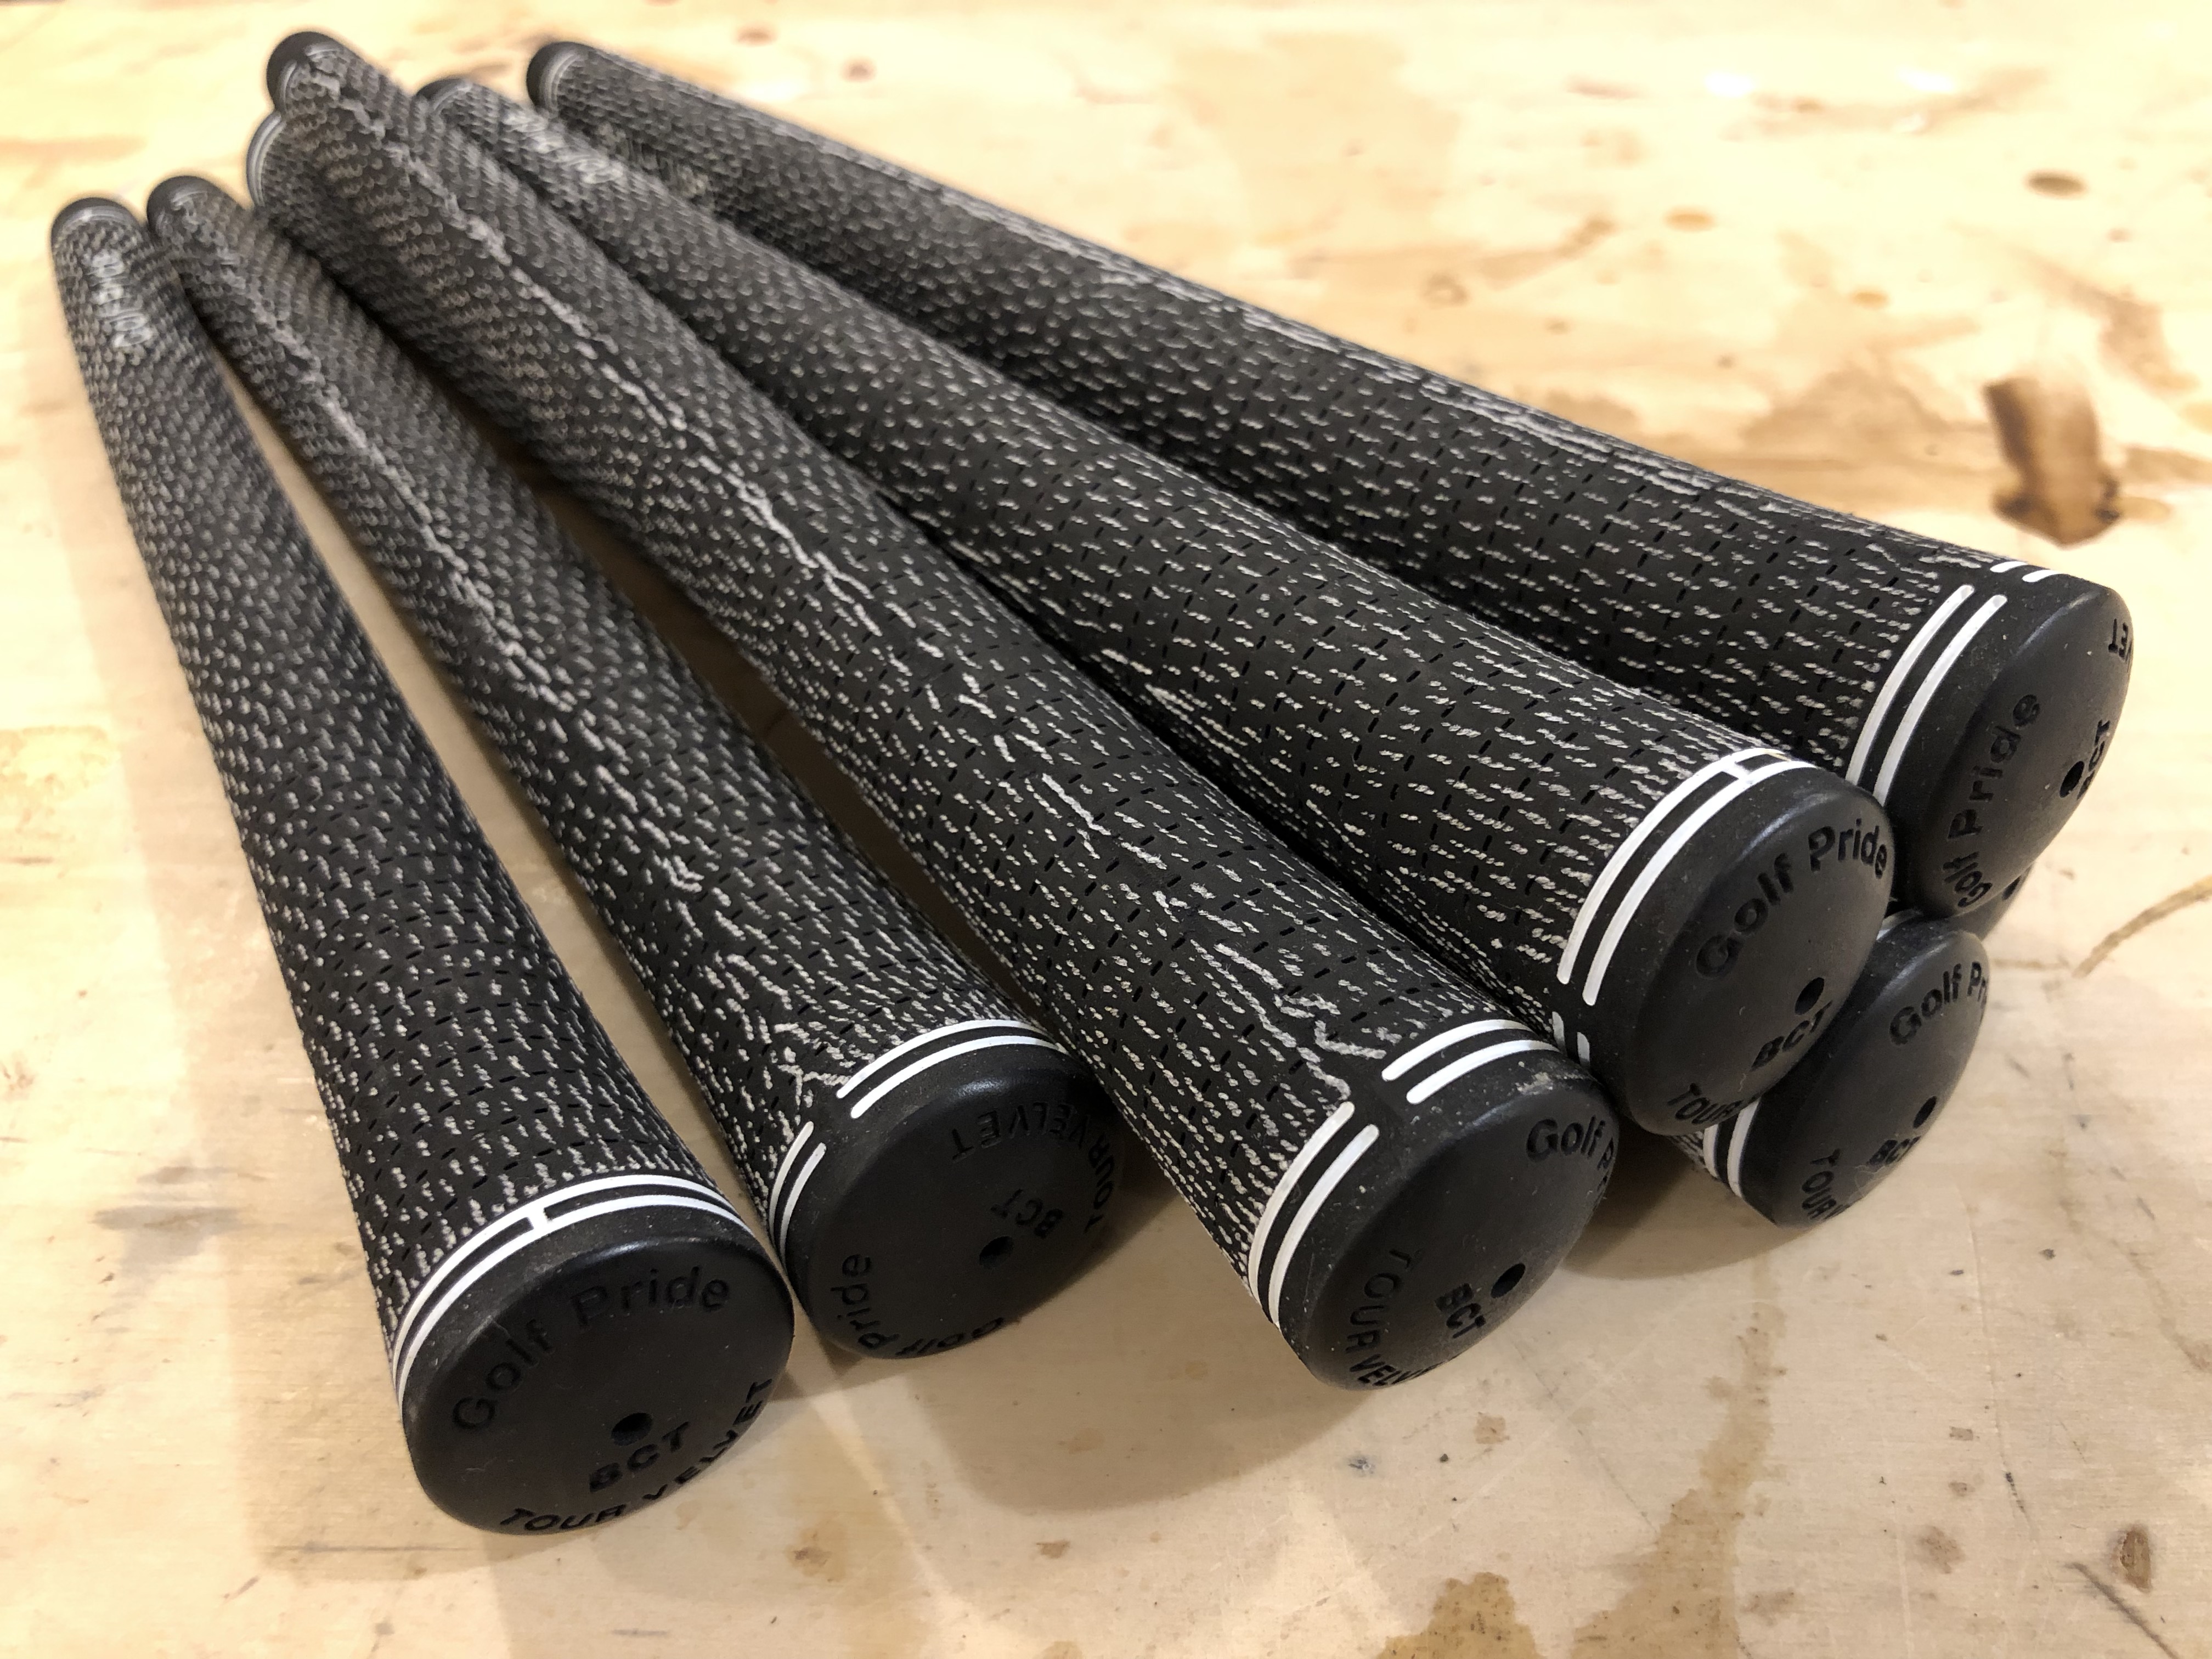 What Is a Half-Cord Golf Grip, Why We Use Cord Grips